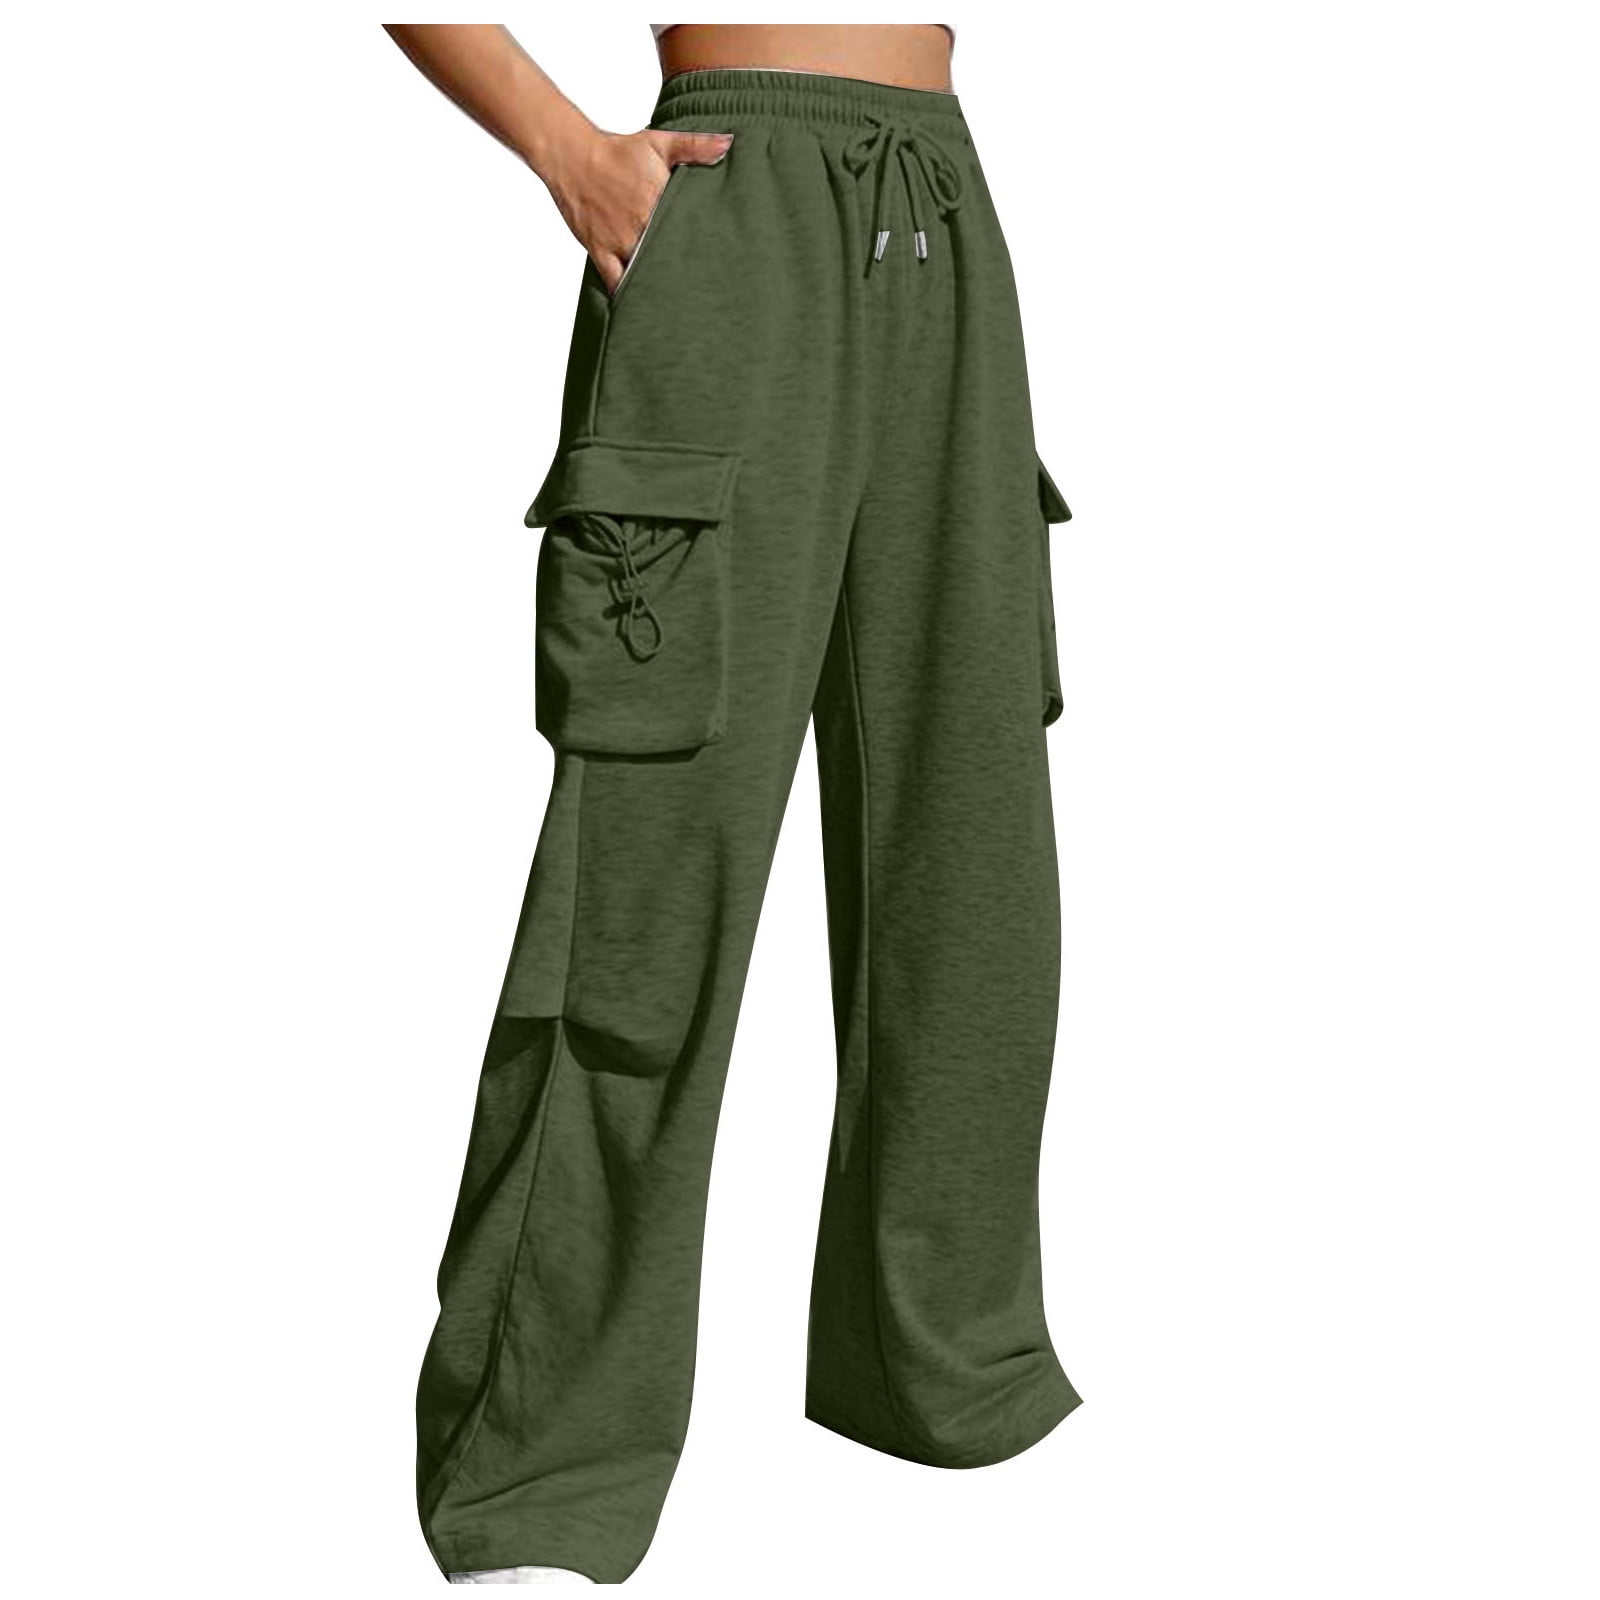  Locoowai 2 Pack Women Straight Leg Sweatpants Drawstring  Elastic Waist Baggy Wide Leg Pants Casual Joggers with Pockets (Army Green,  Dark Gray,Small) : Clothing, Shoes & Jewelry